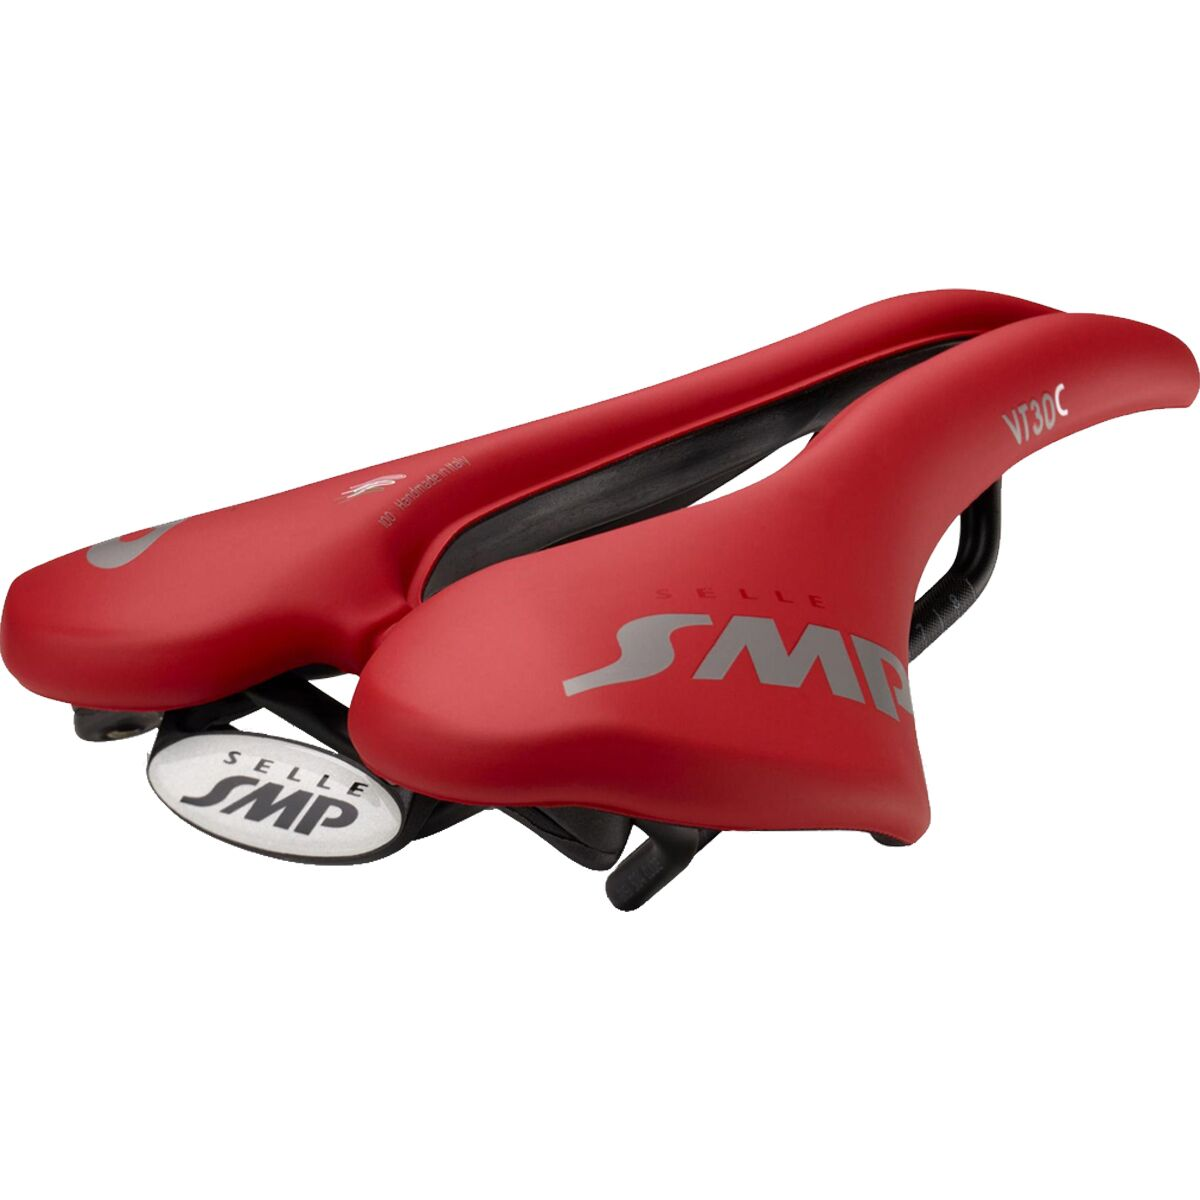 Selle Smp VT30 Red